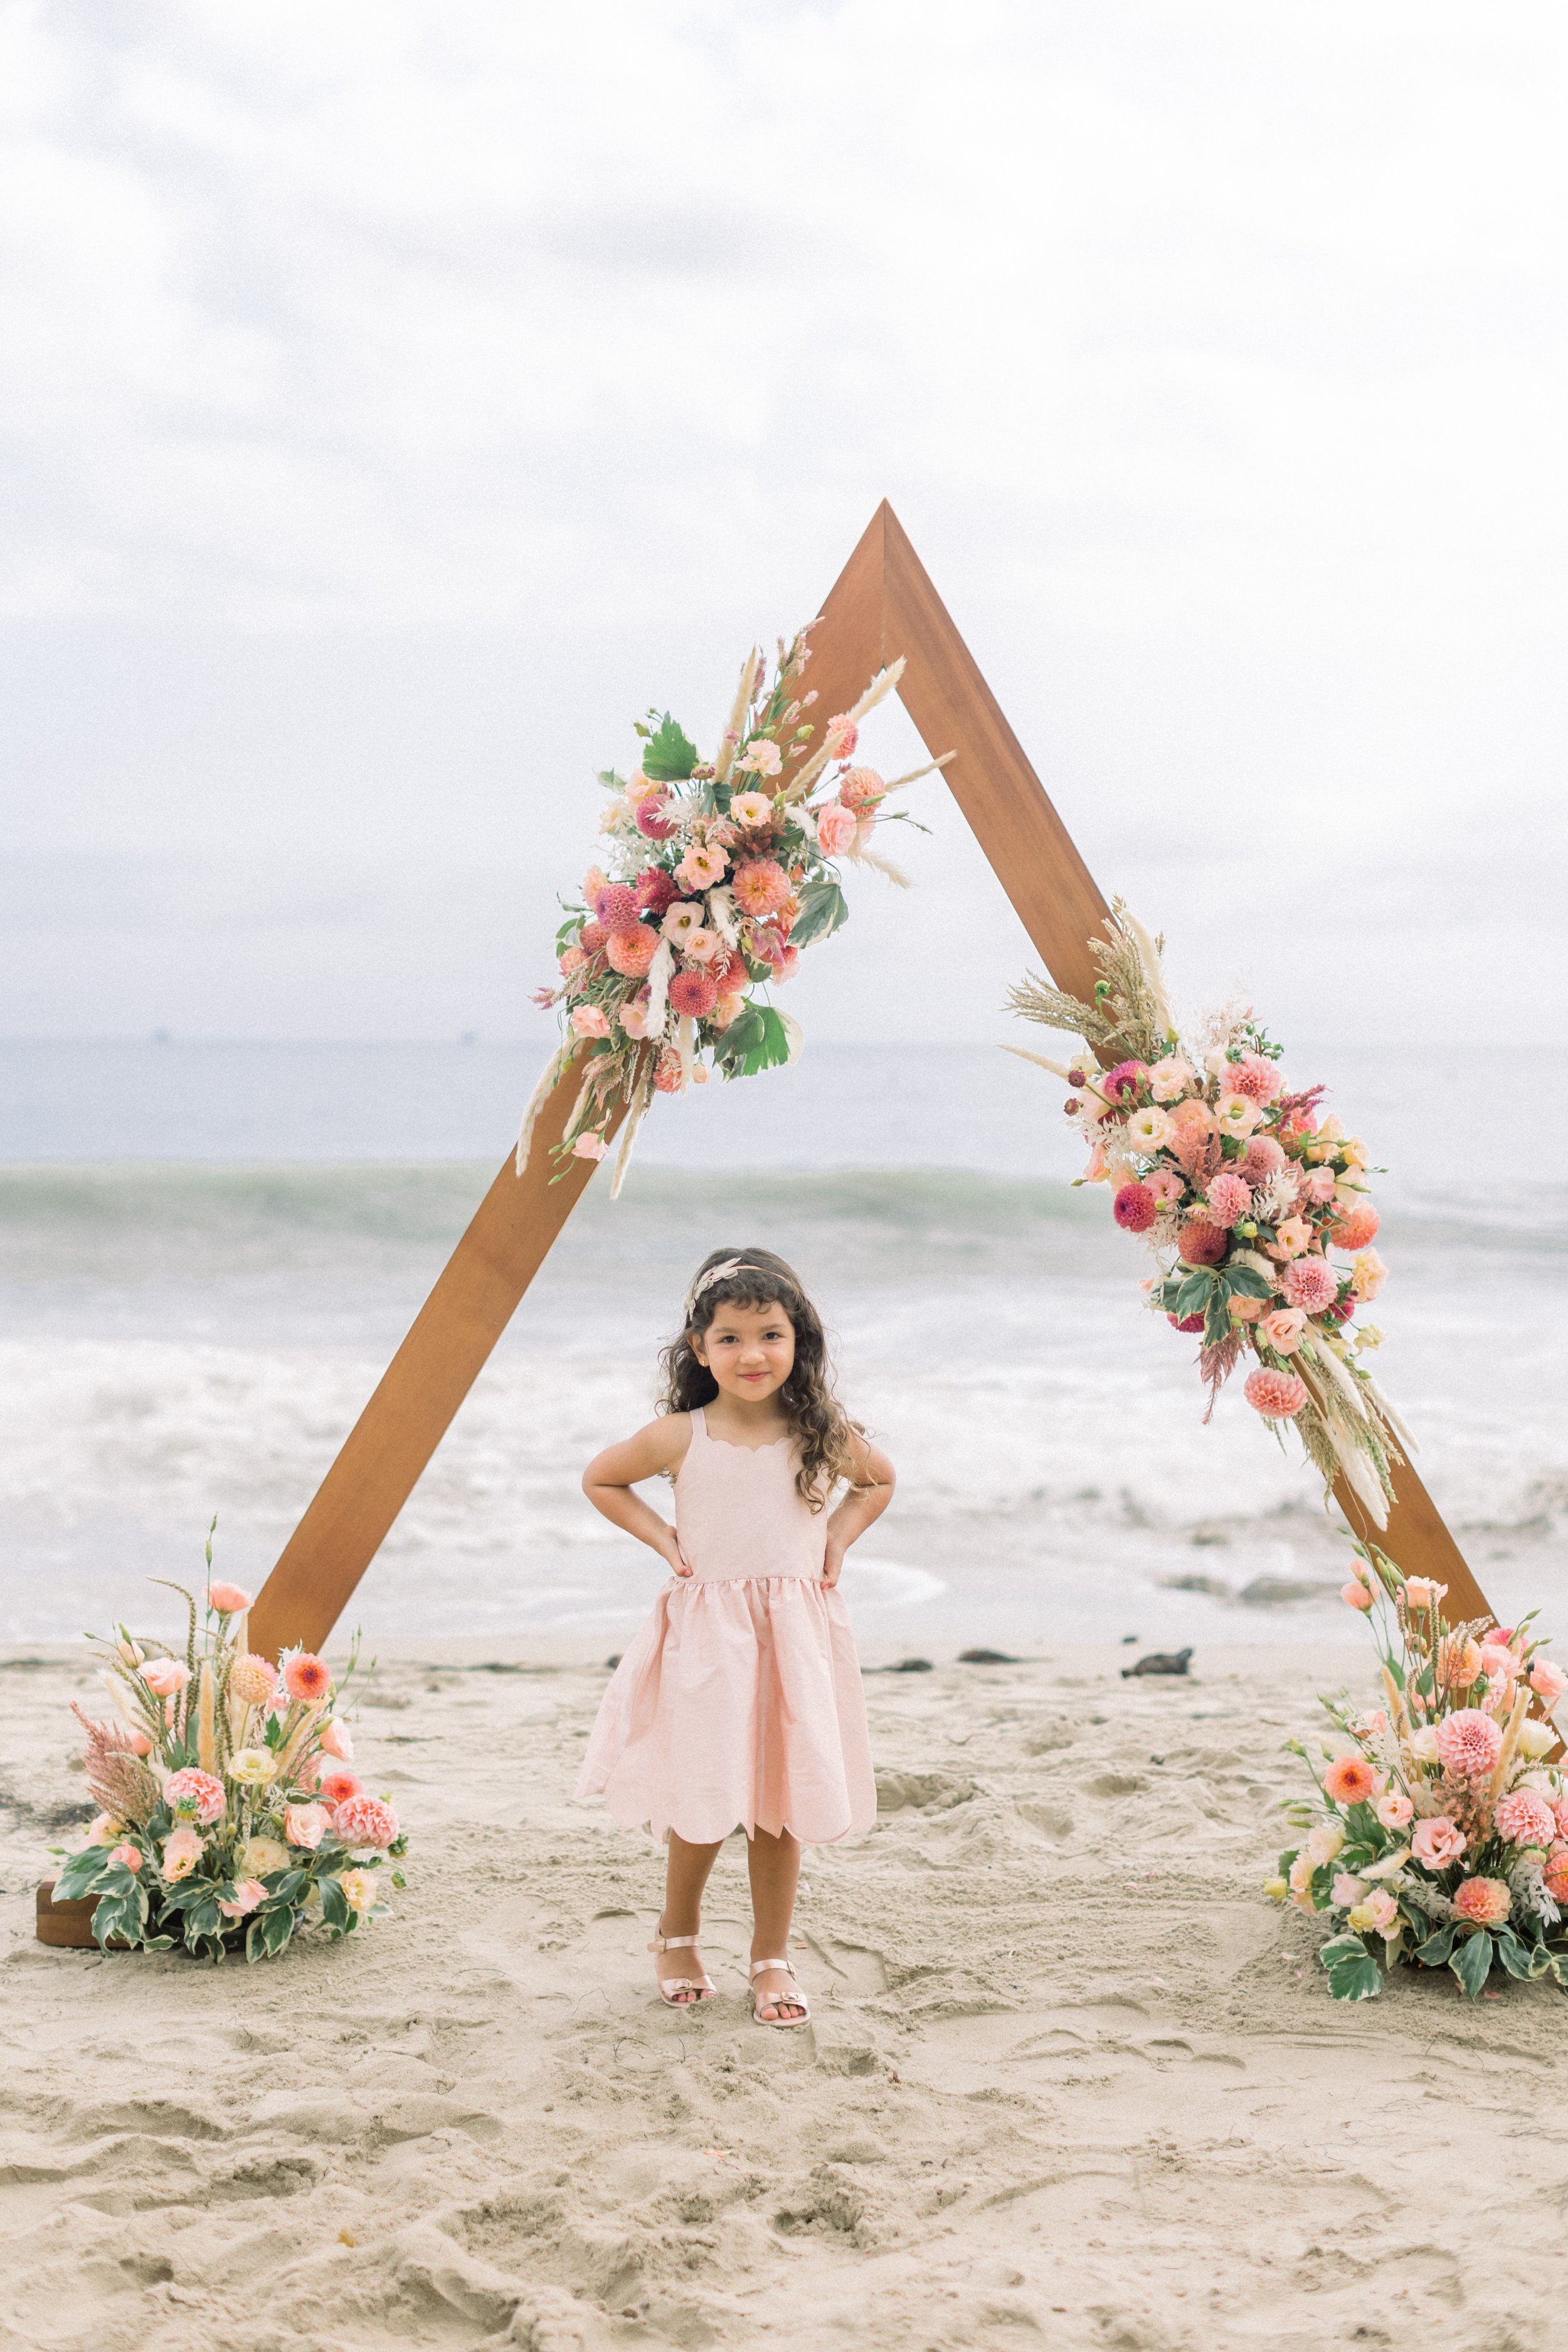 www.santabarbarawedding.com | James &amp; Jess Photography | Slate Catering | All Heart Rentals | Ella &amp; Louie | Flower Girl Standing in Front of Triangular Shaped Wedding Arch 